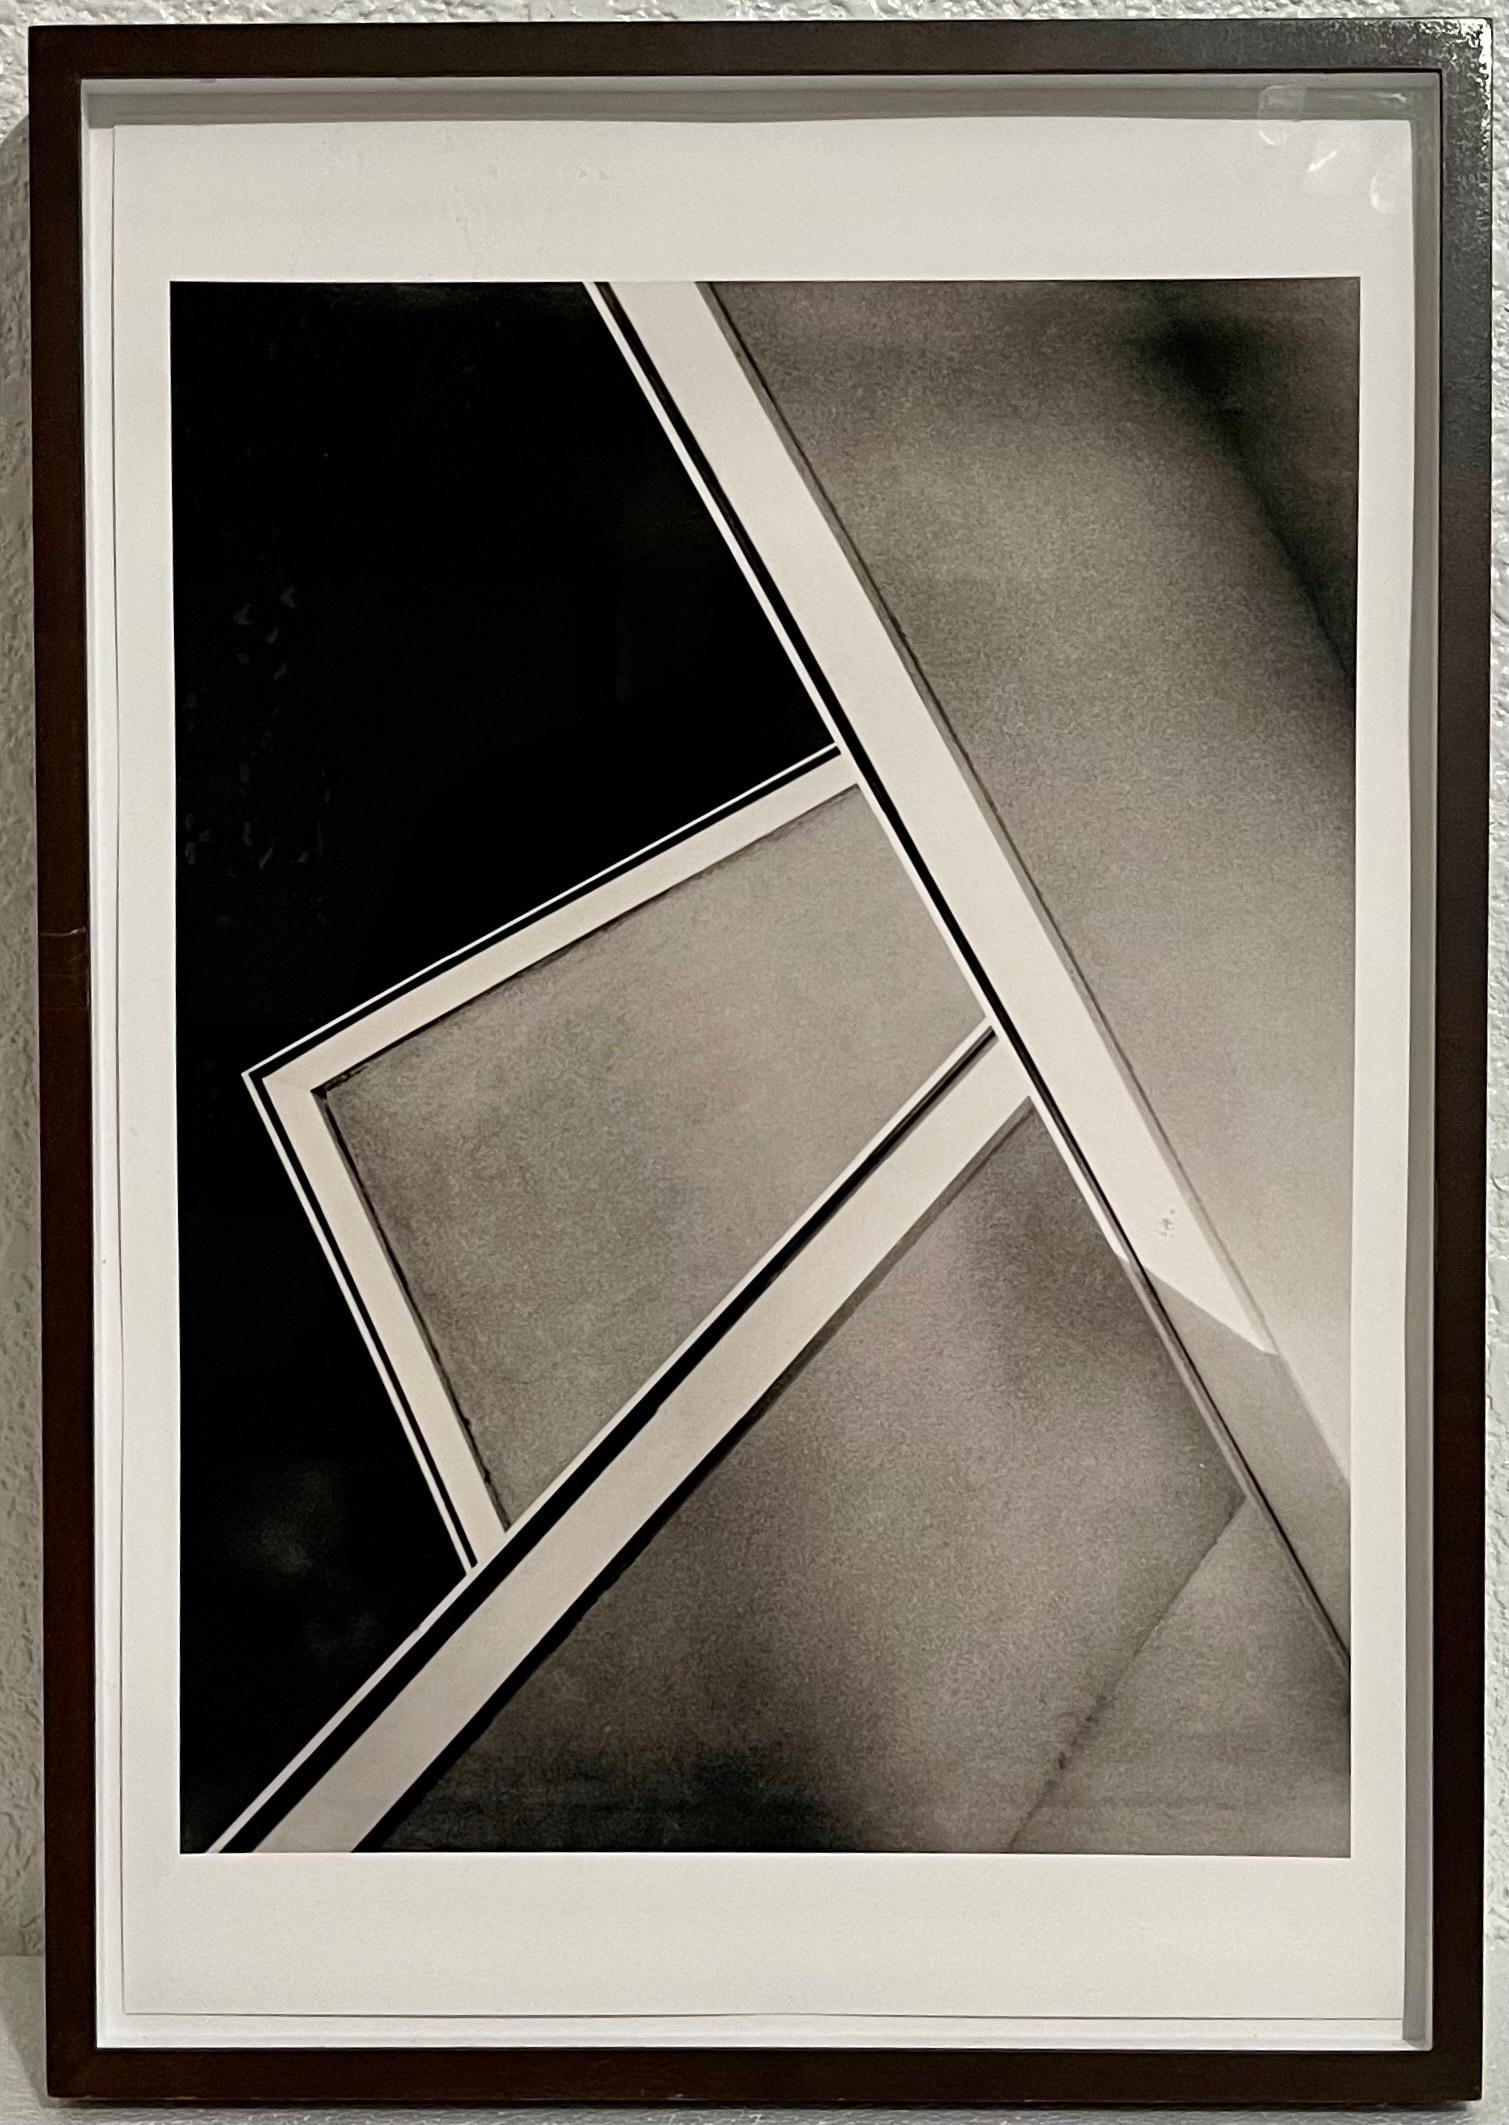 José Yalenti, (1895-1967) Brazilian Photographer
"Beiras" (Sides) 
Photo, numbered 5/15, circa 1950, (printed later) on premium luster photo paper with ultrachrome ink. 
Art: 15" H x  11" W; Frame: 20 1/4" H x 14 1/4" W. 
Provenance: Dickinson